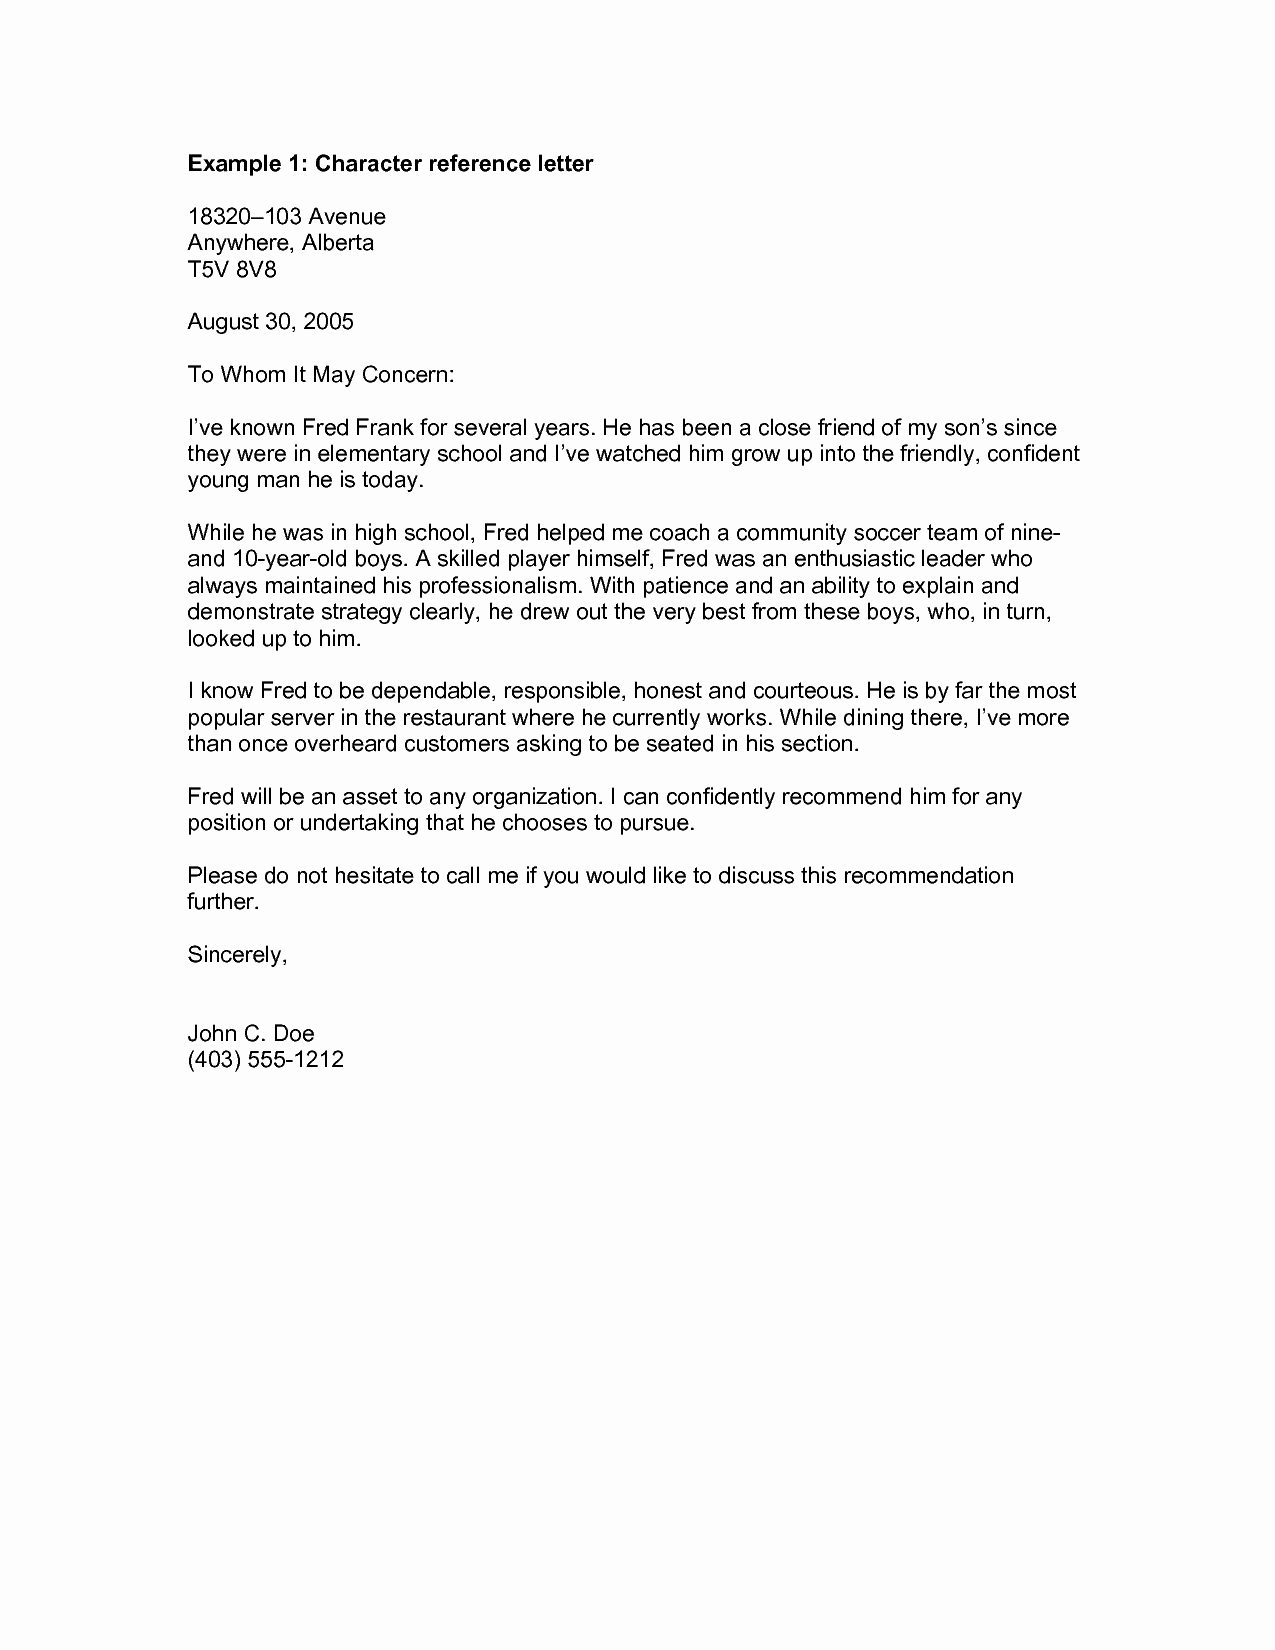 Letter Of Recomendation Template Beautiful Re Mendation Letter for A Friend Template